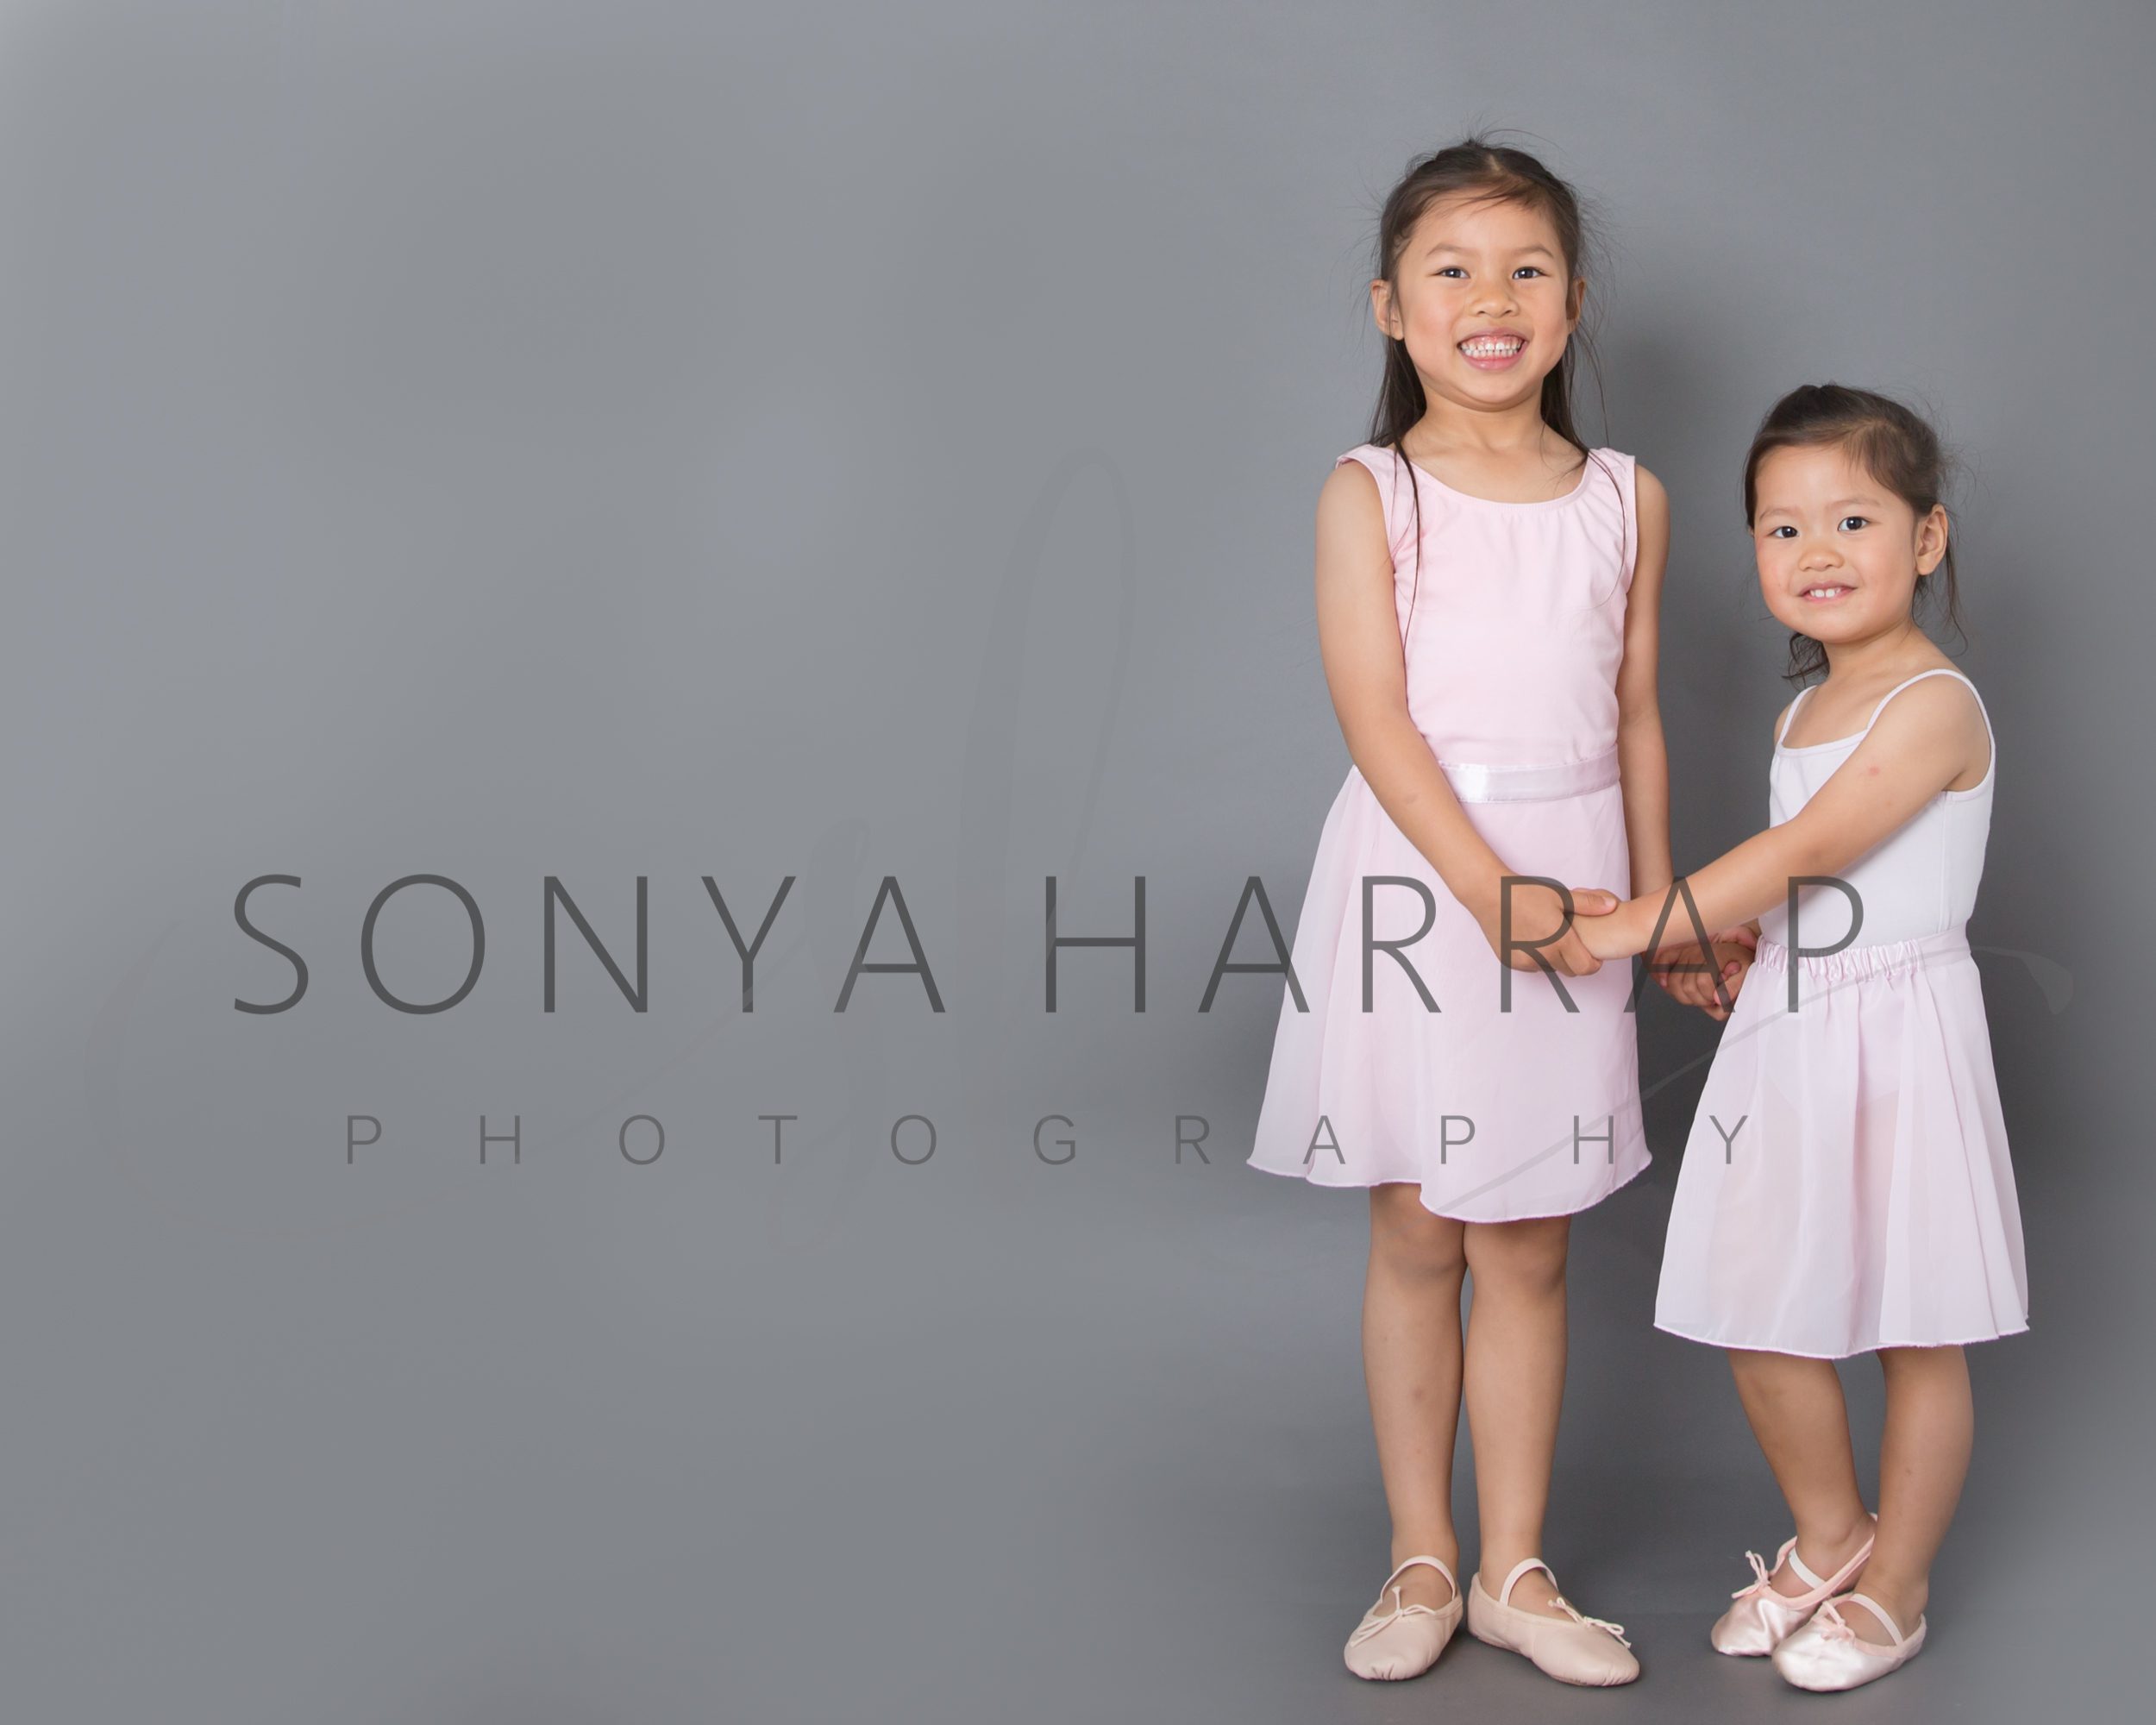 sisters Family photoshoot and Child portraits by Sonya Harrap photography in Hertfordshire